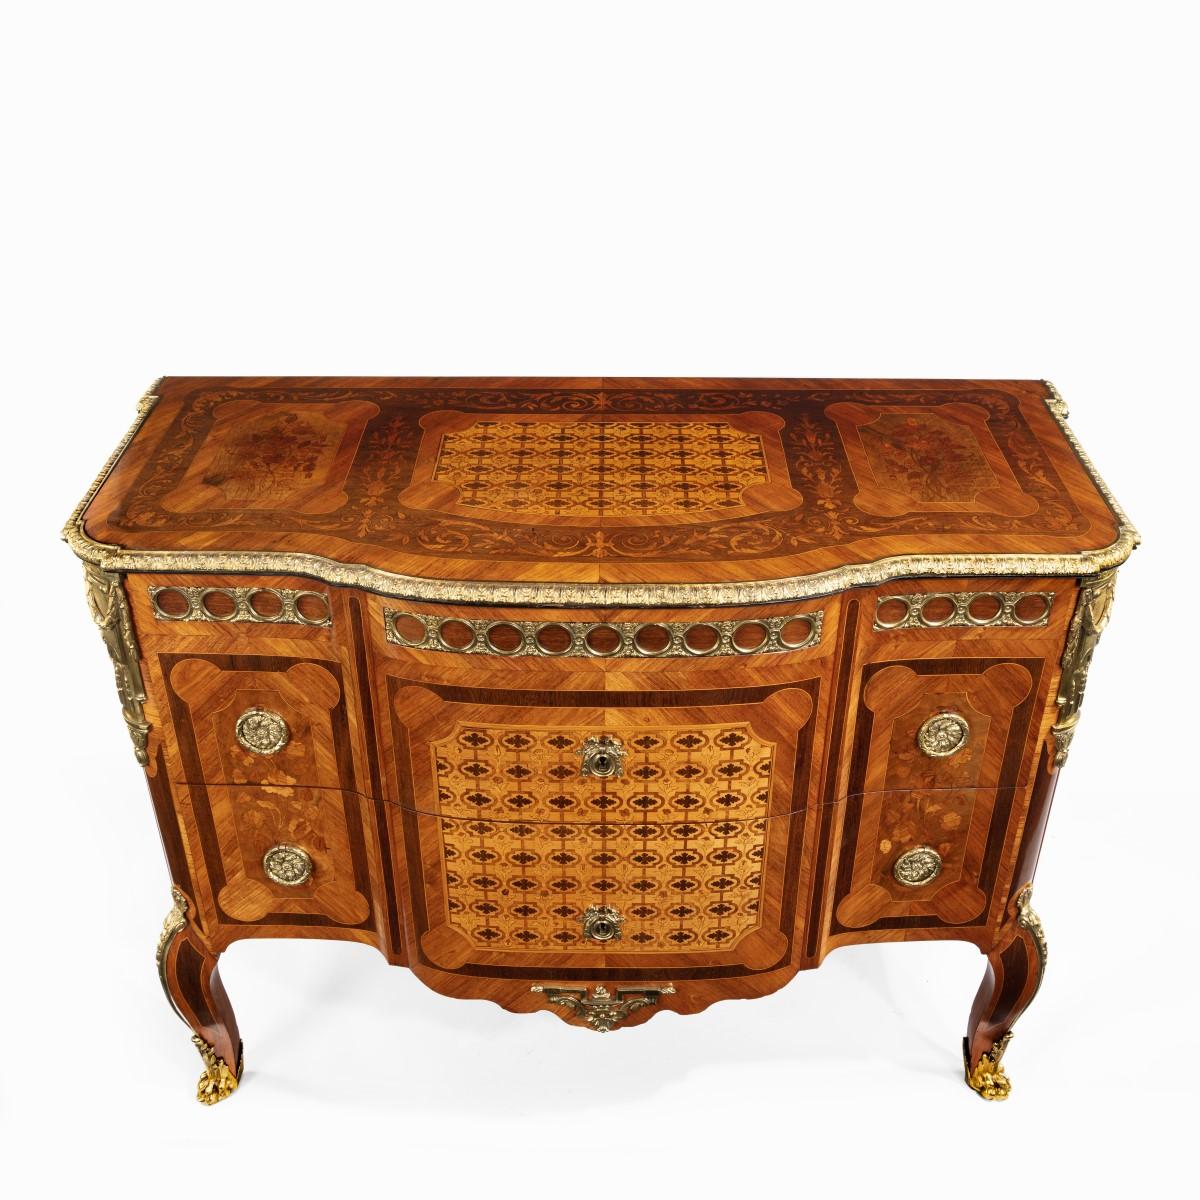 A French kingwood marquetery commode, the shaped rectangular top inlaid with tulipwood, harewood and boxwood marquetry comprising a flowerhead trellis flanked by floral panels and within reserved foliate scroll borders and cross banding, above two